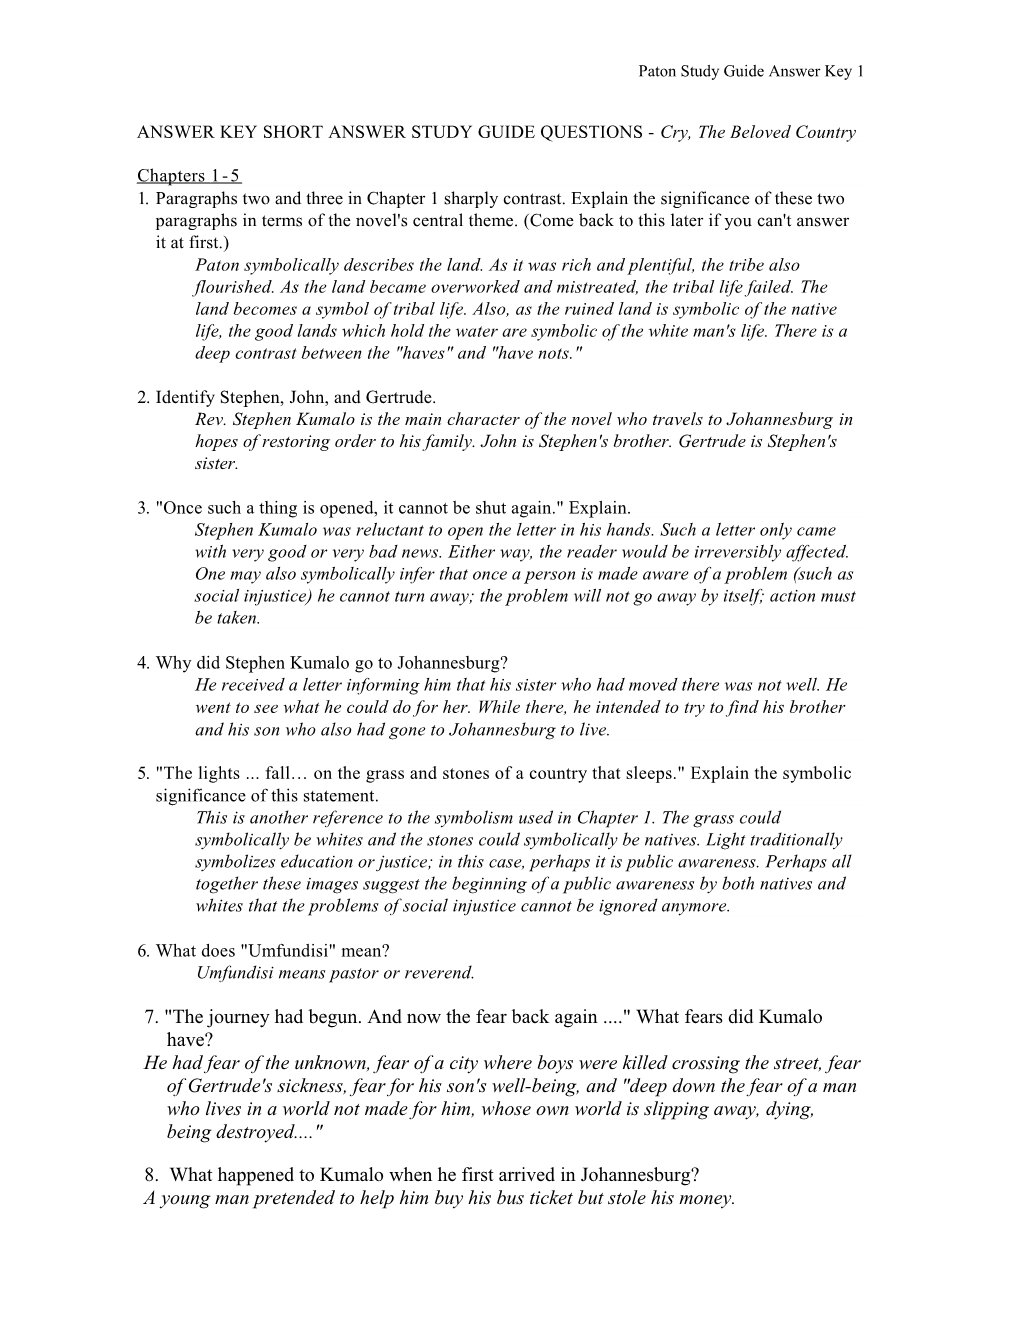 ANSWER KEY SHORT ANSWER STUDY GUIDE QUESTIONS - Cry, The Beloved Country